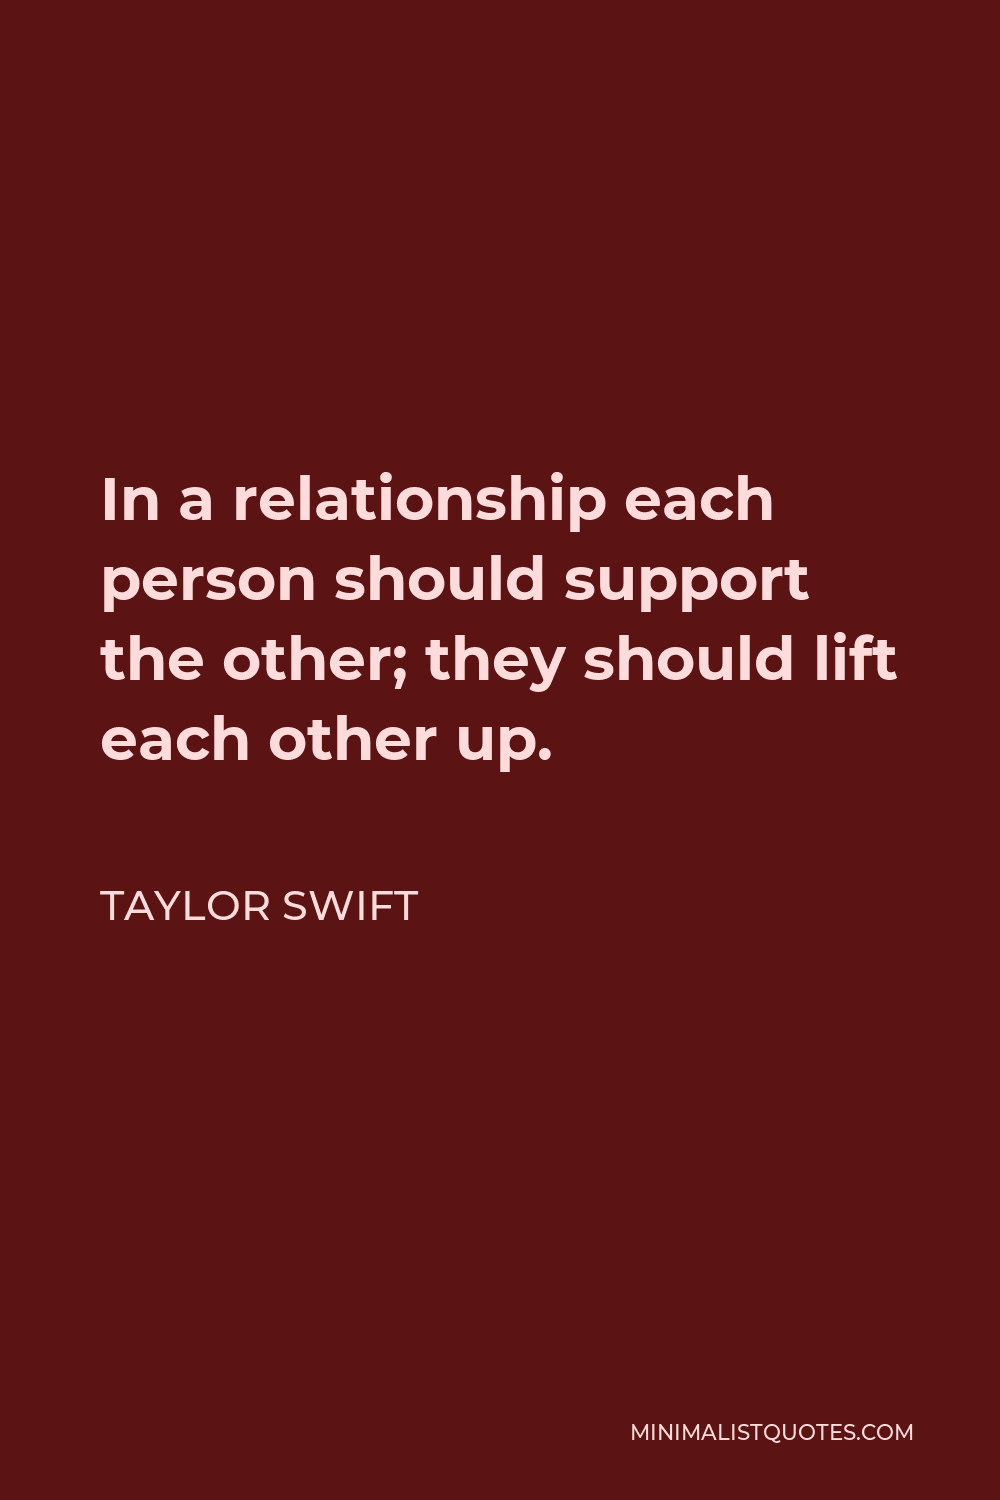 Taylor Swift Quote - In a relationship each person should support the other; they should lift each other up.